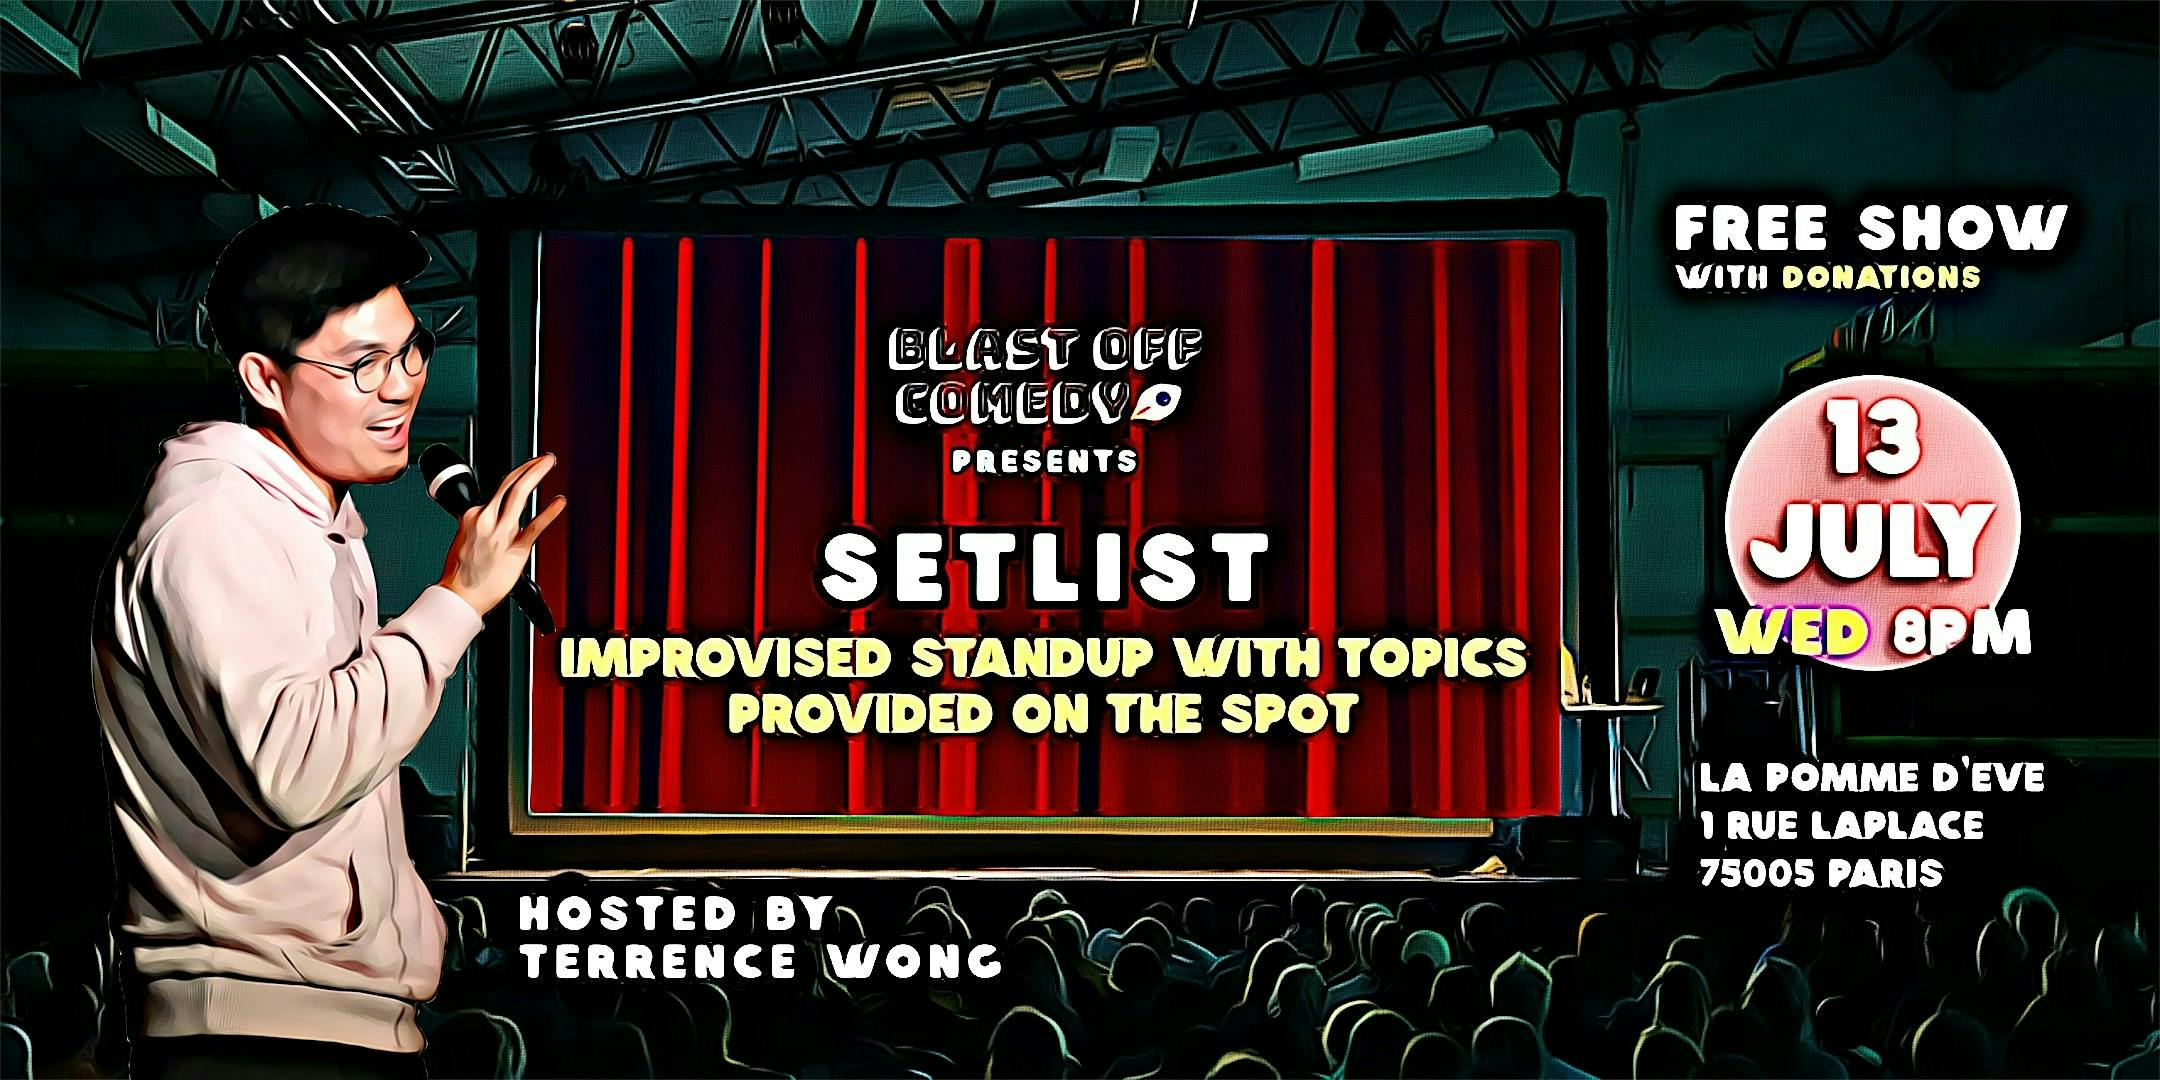 Setlist - Improvised Standup With Topics Provided On The Spot 13.07 logo